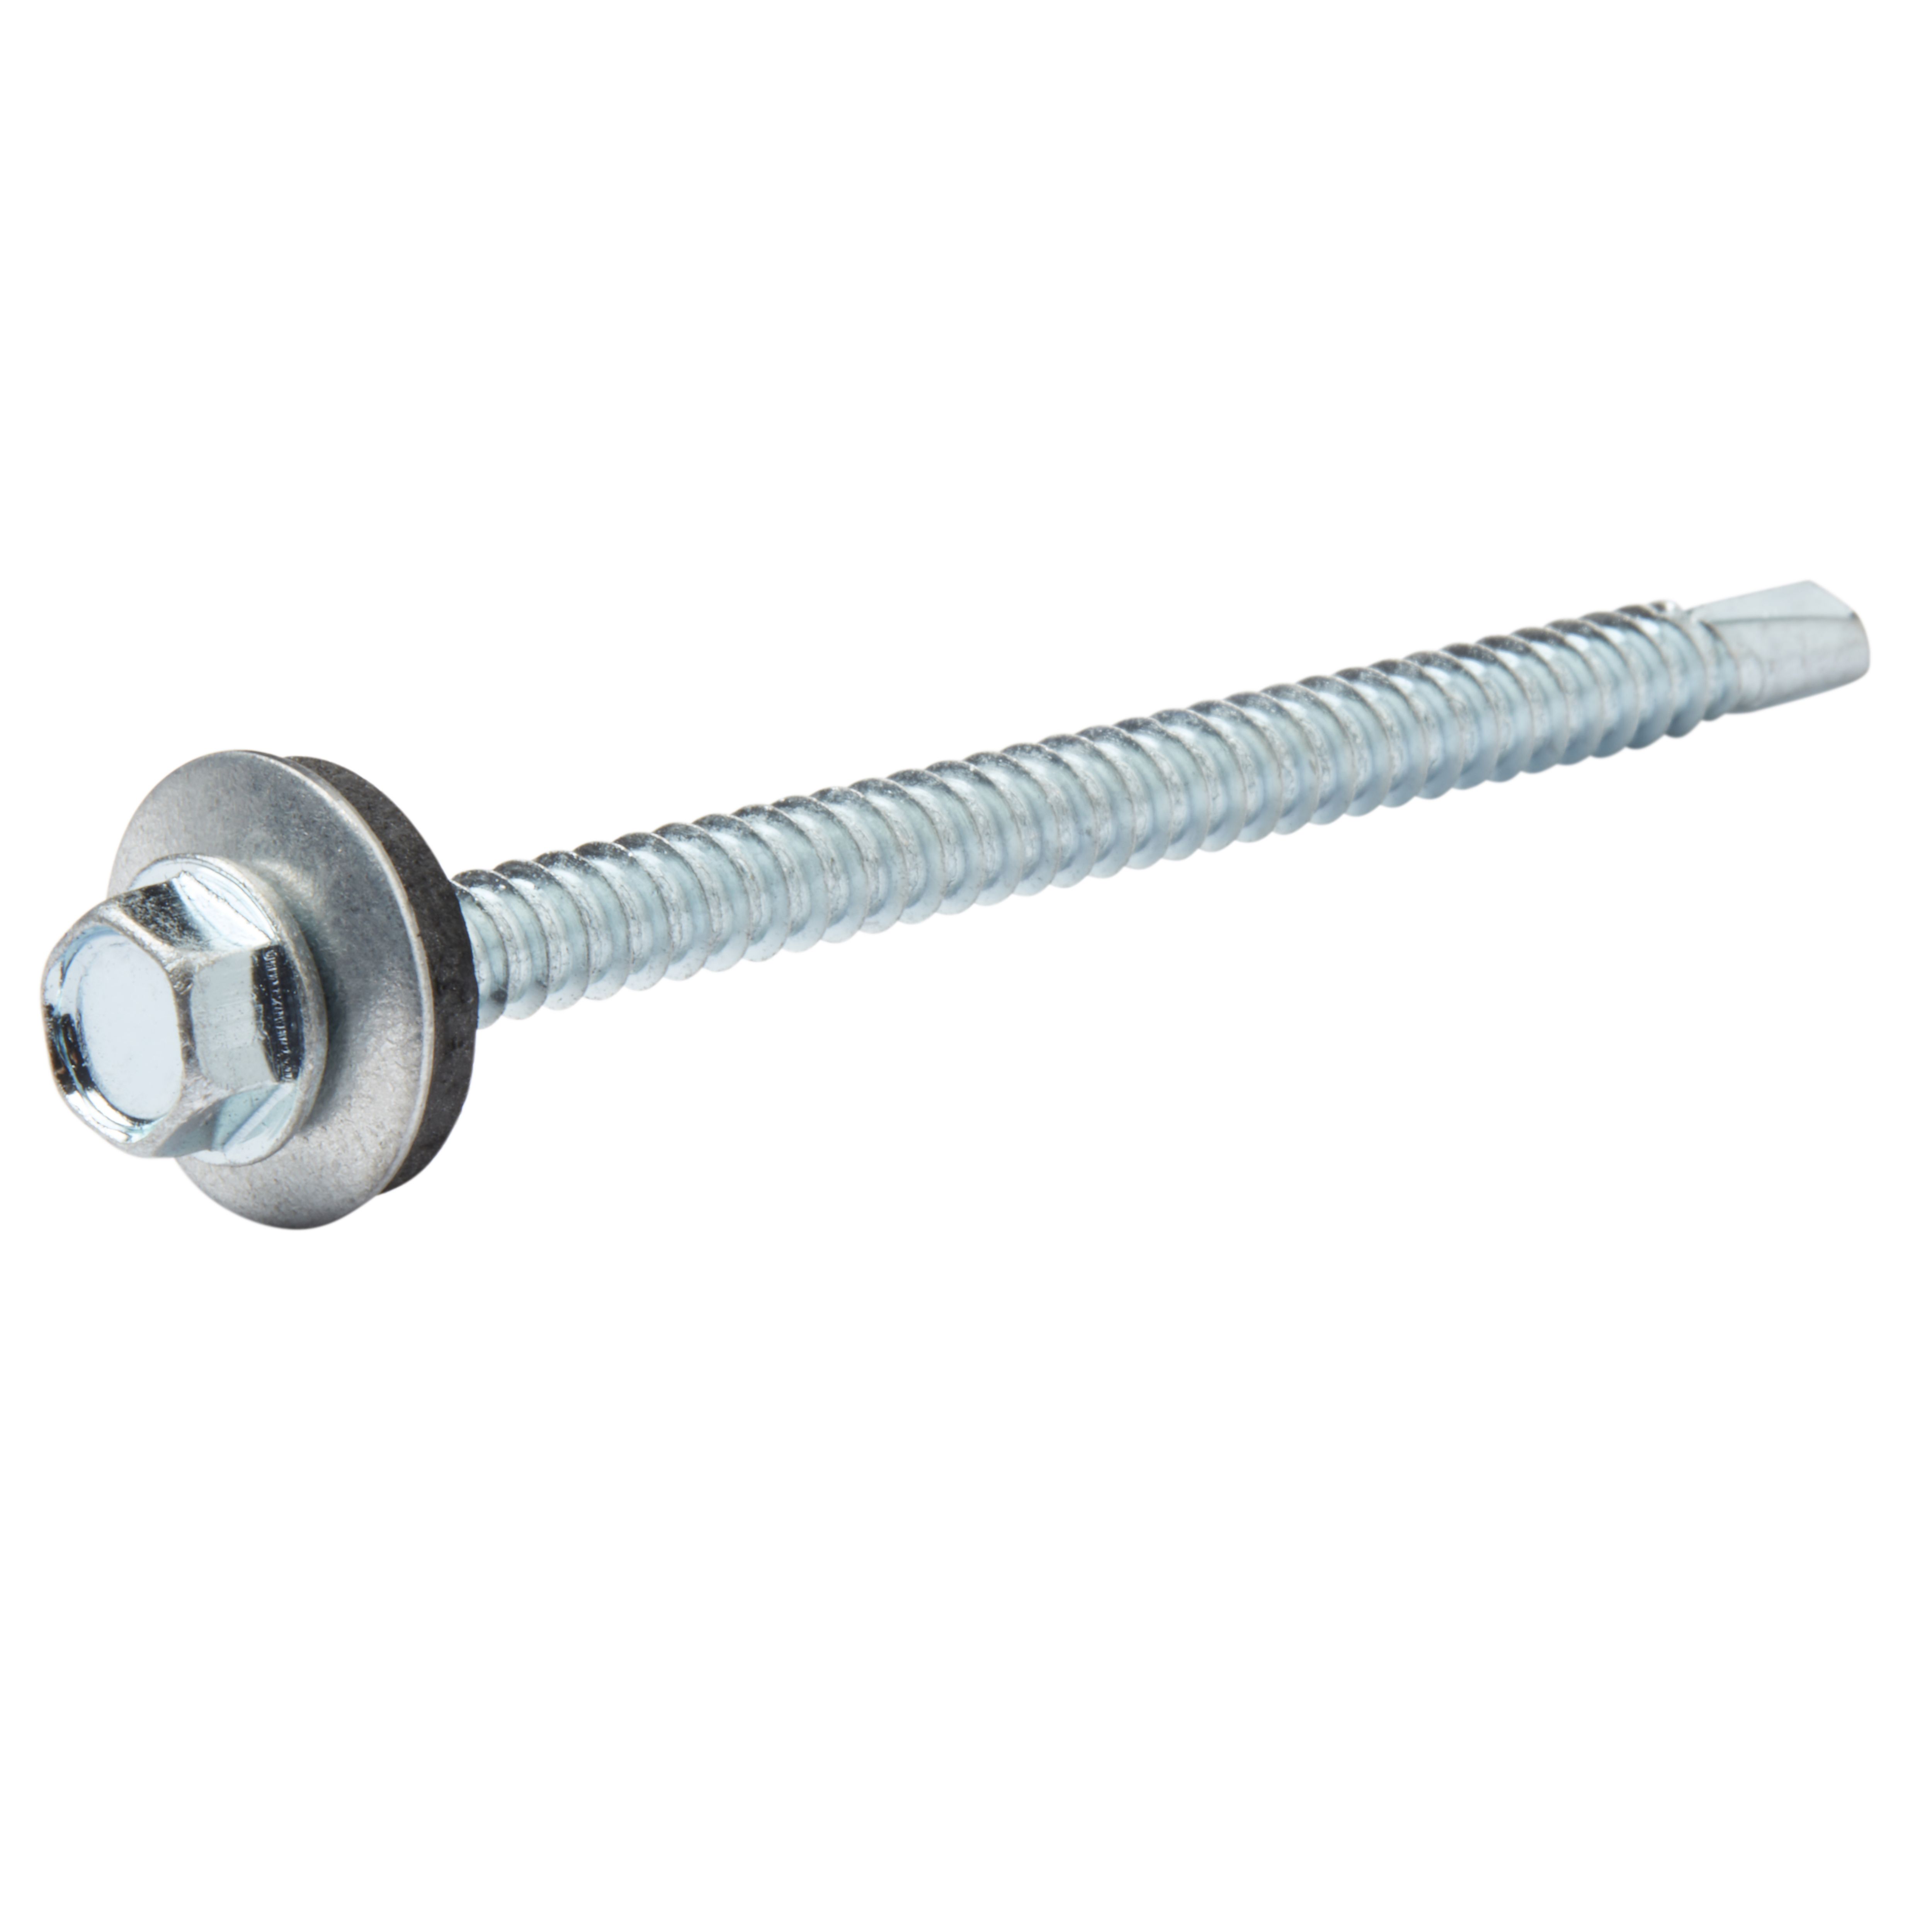 Diall Zinc-plated Carbon steel Roofing screw (Dia)5.5mm (L)80mm, Pack of 50